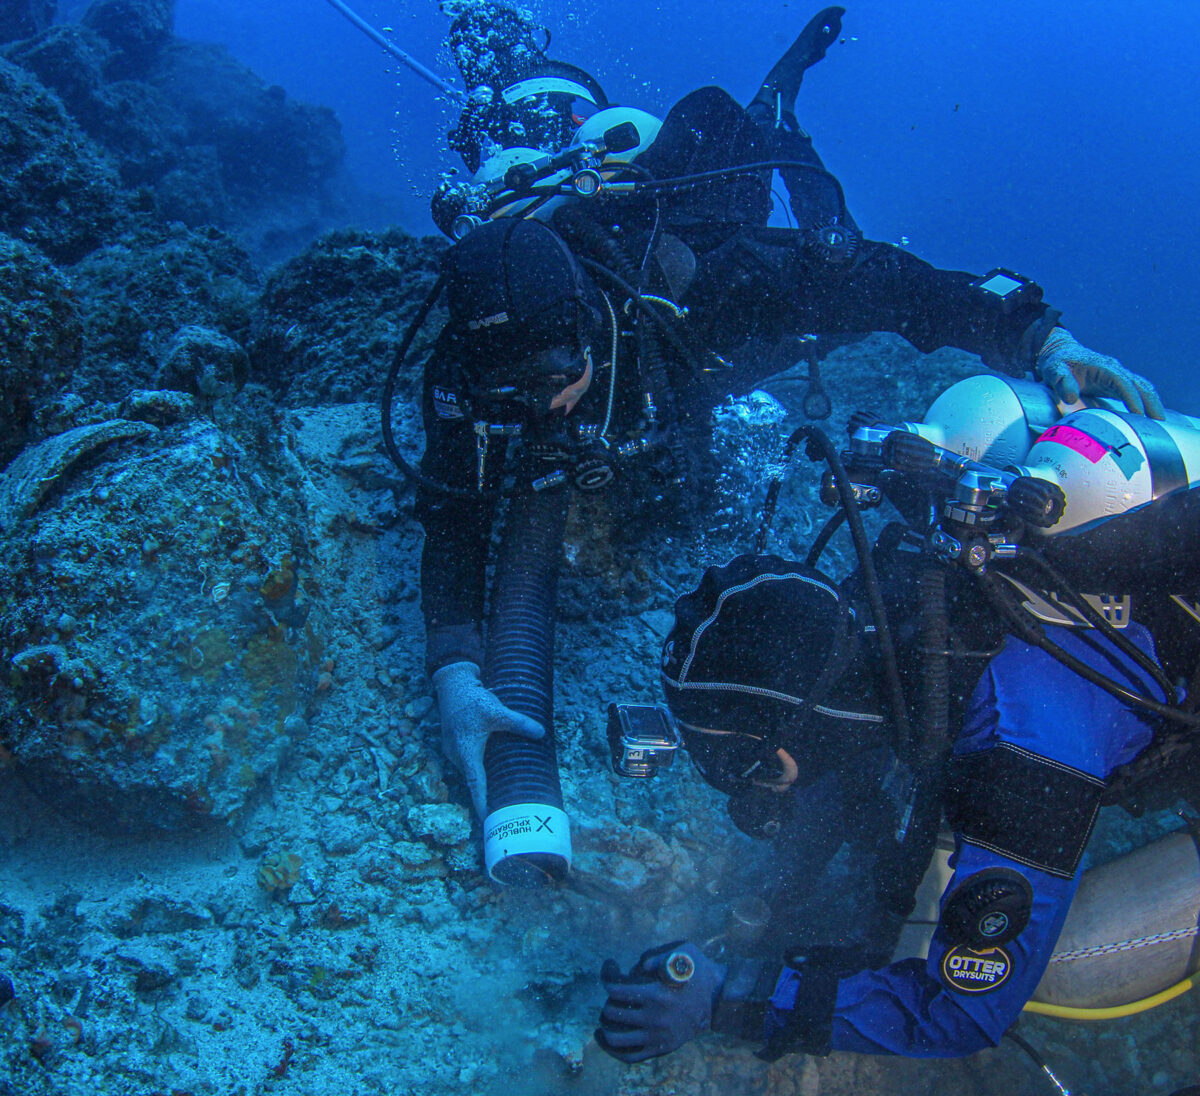 Impressive new finds from the Antikythera shipwreck